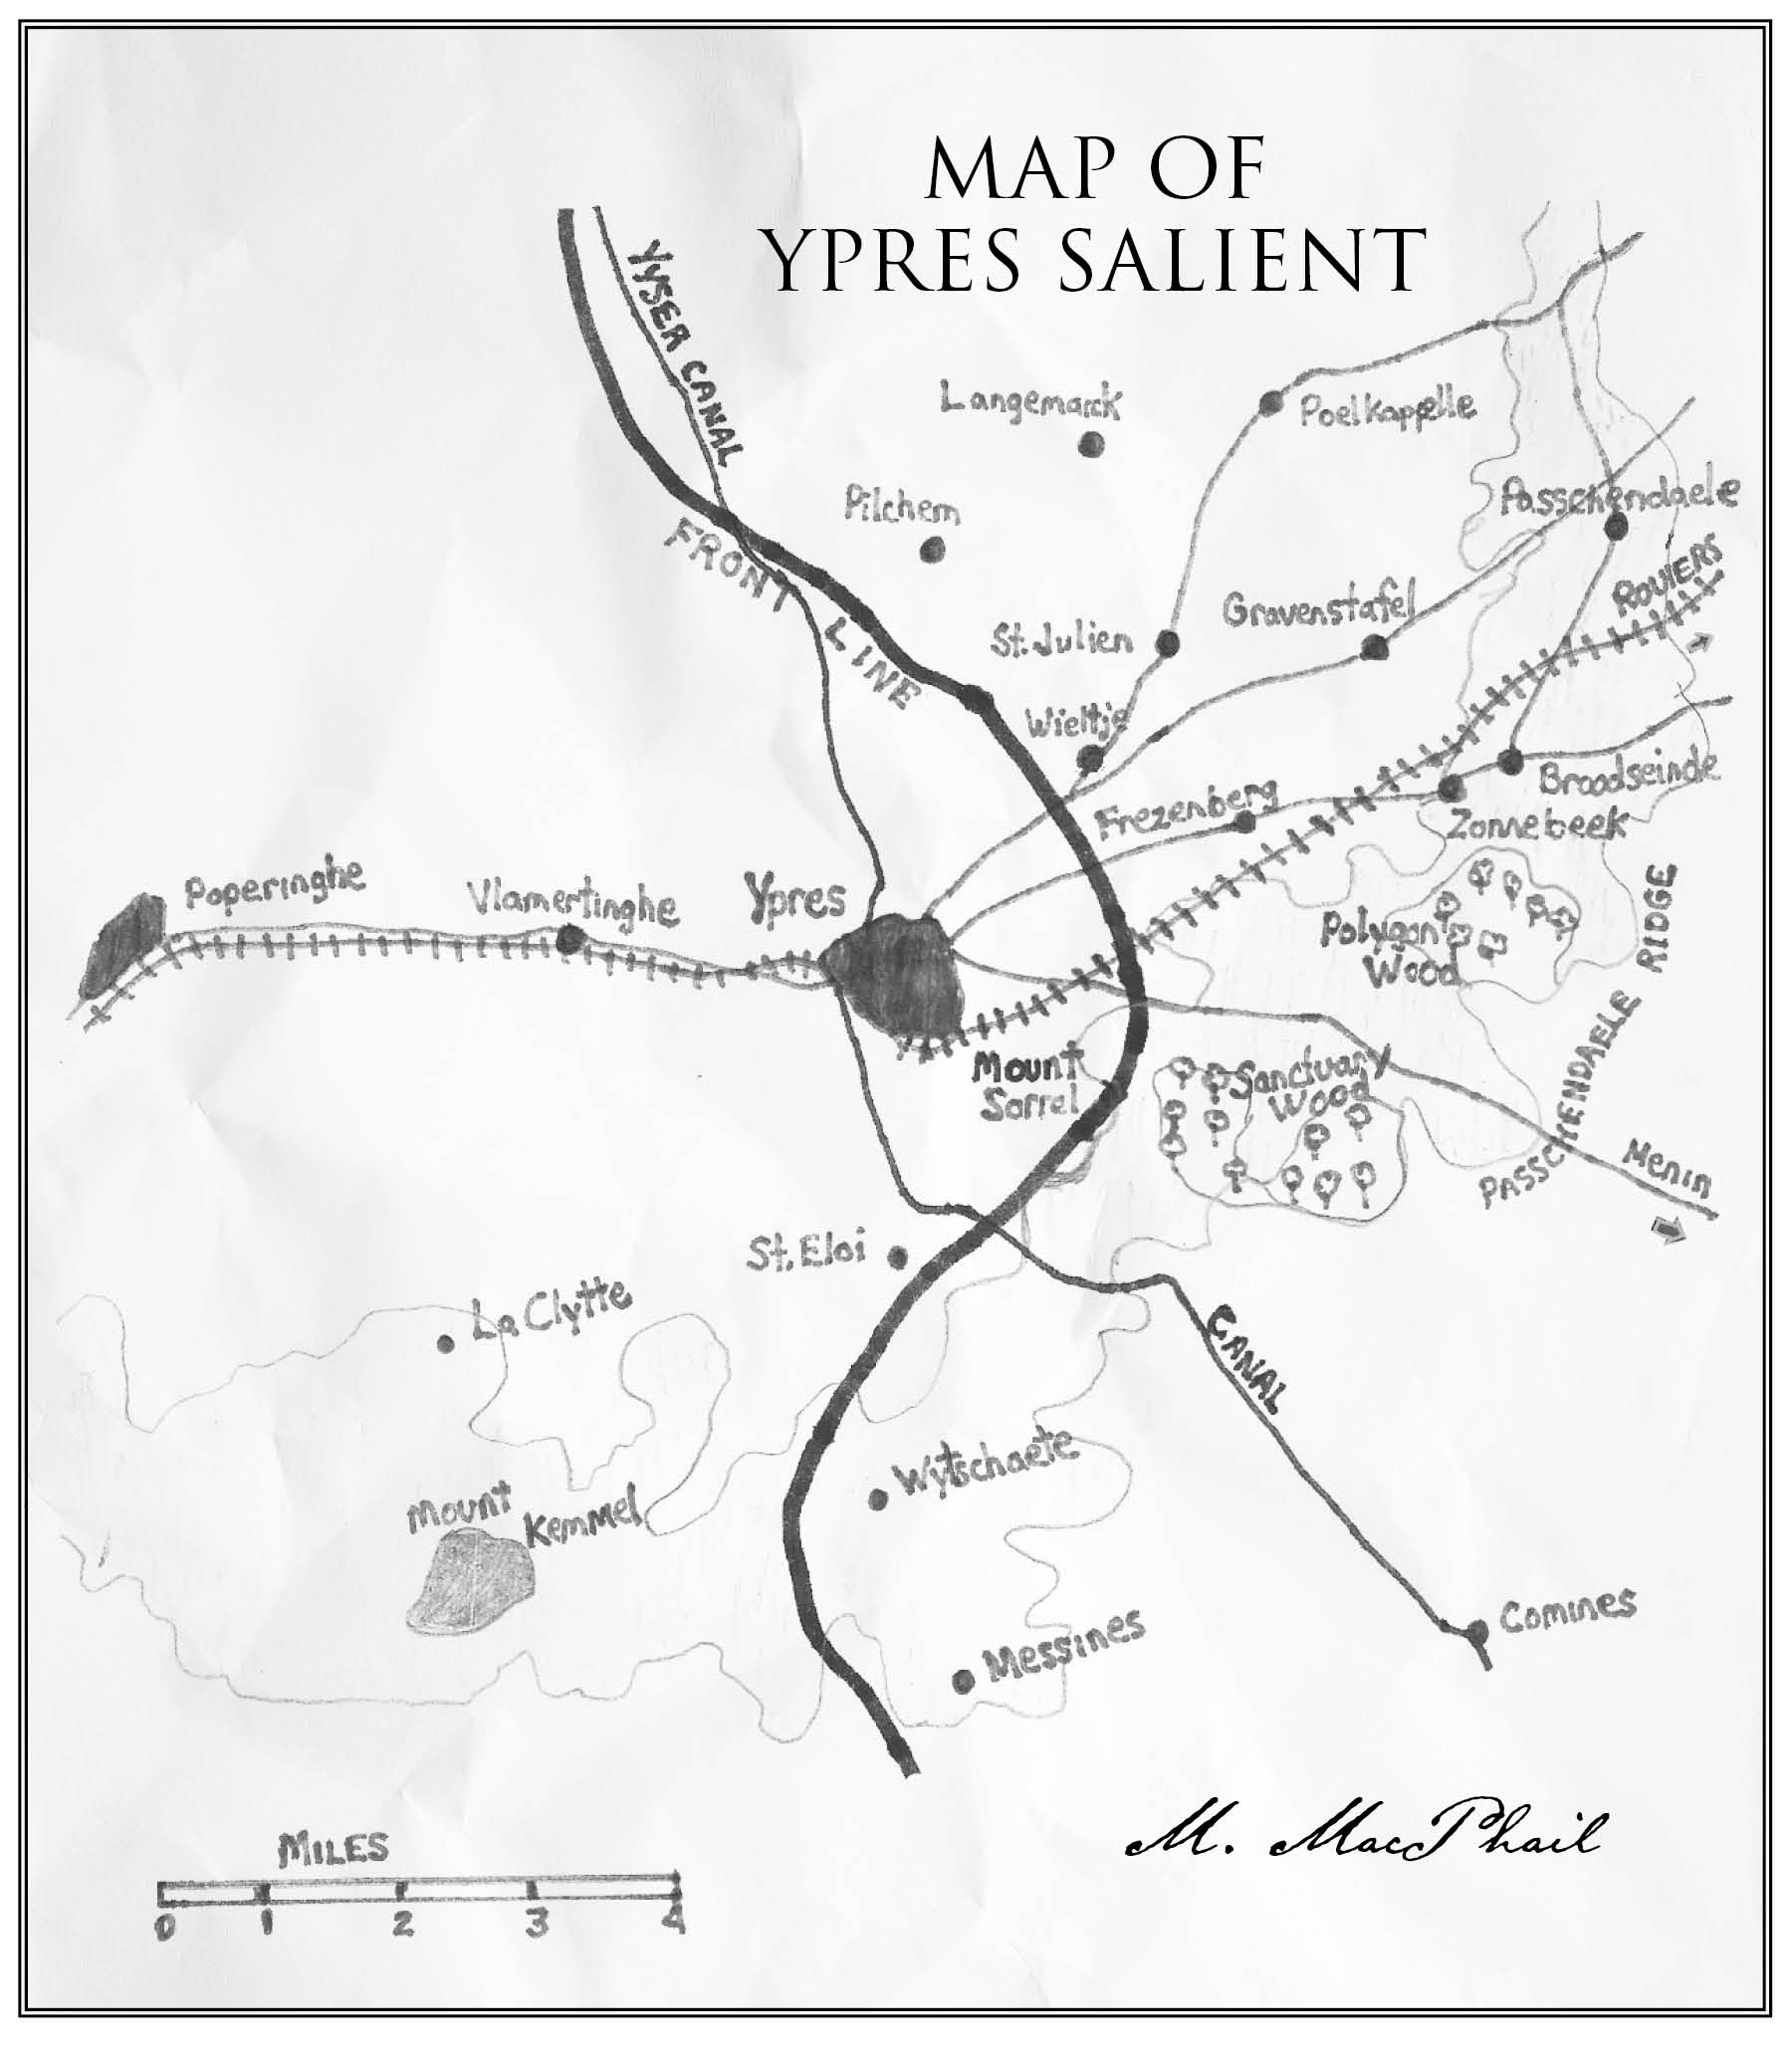 M Marcel phail Map of Ypres salient 1914 Maps5